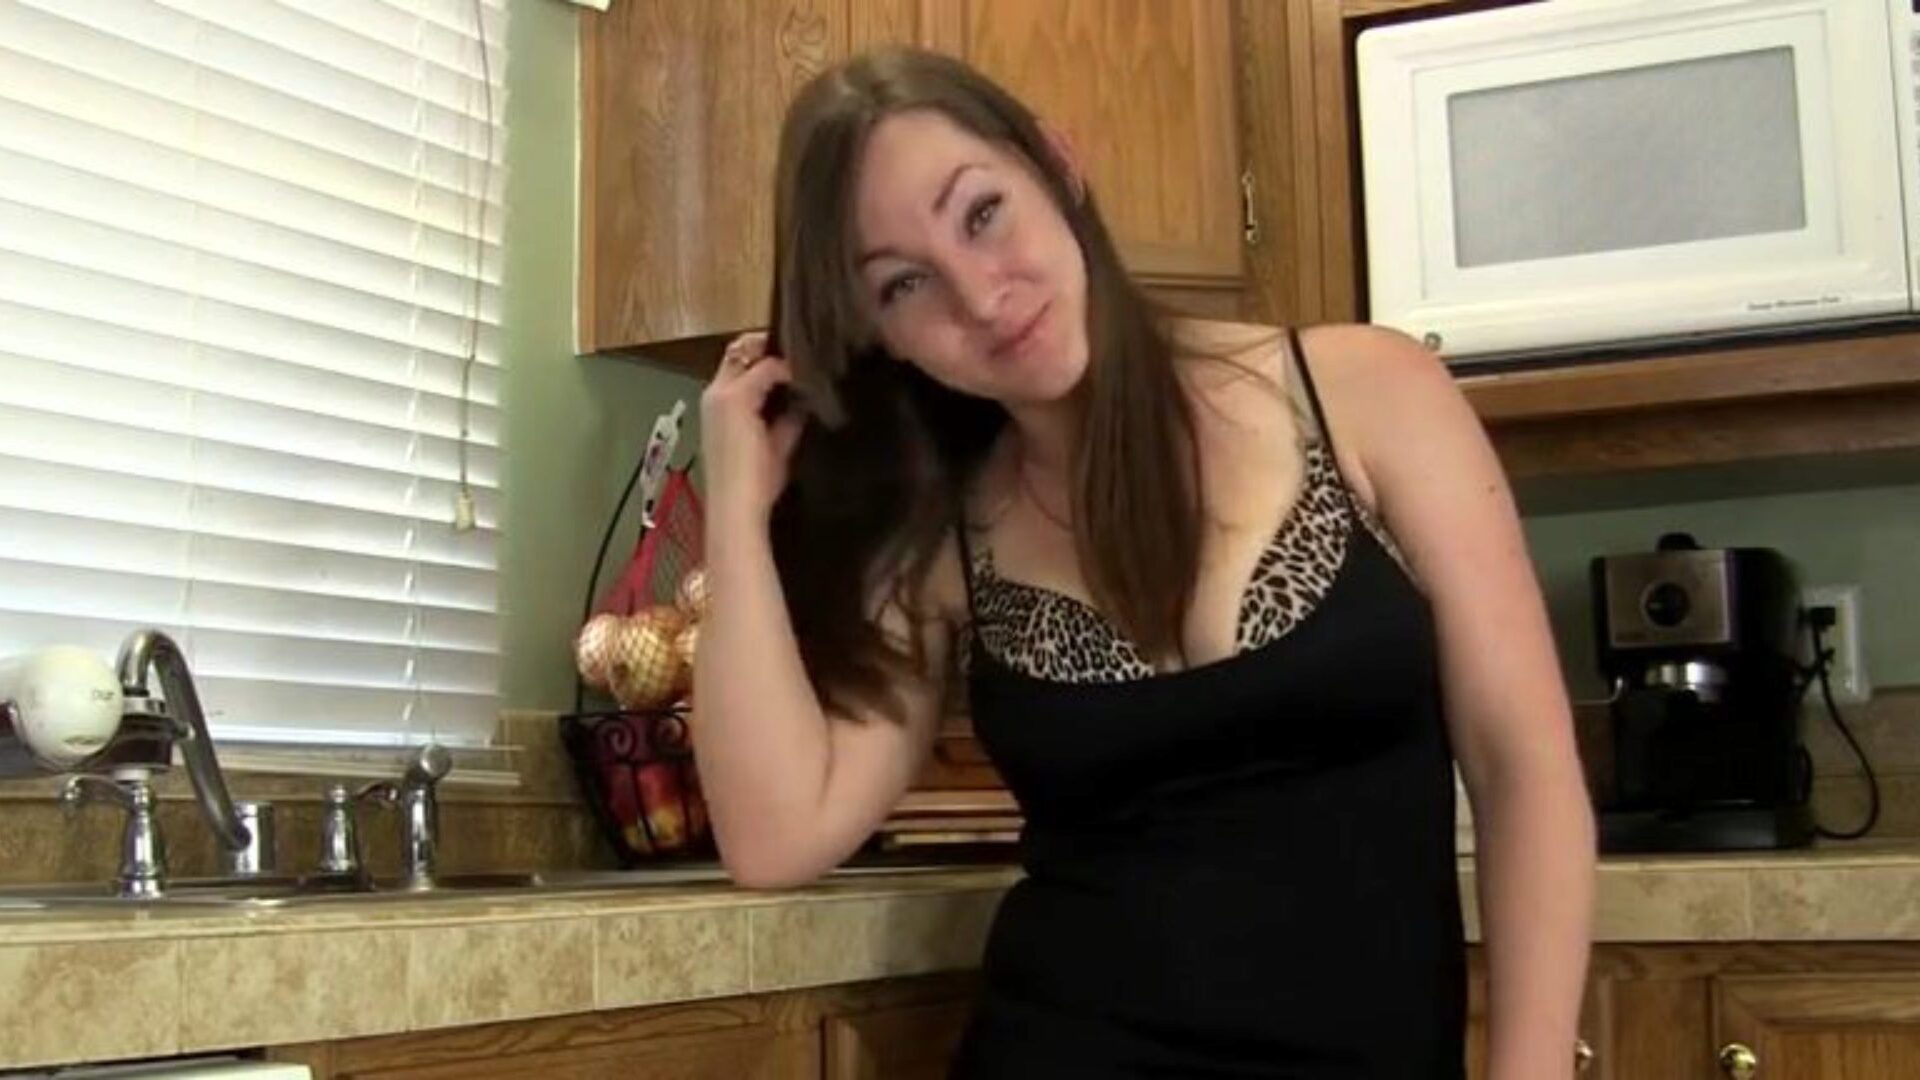 Smell Your Sister's Bewitching Dark Hole Brother - Taboo mommy I'd like to pummel Kinky Kristi